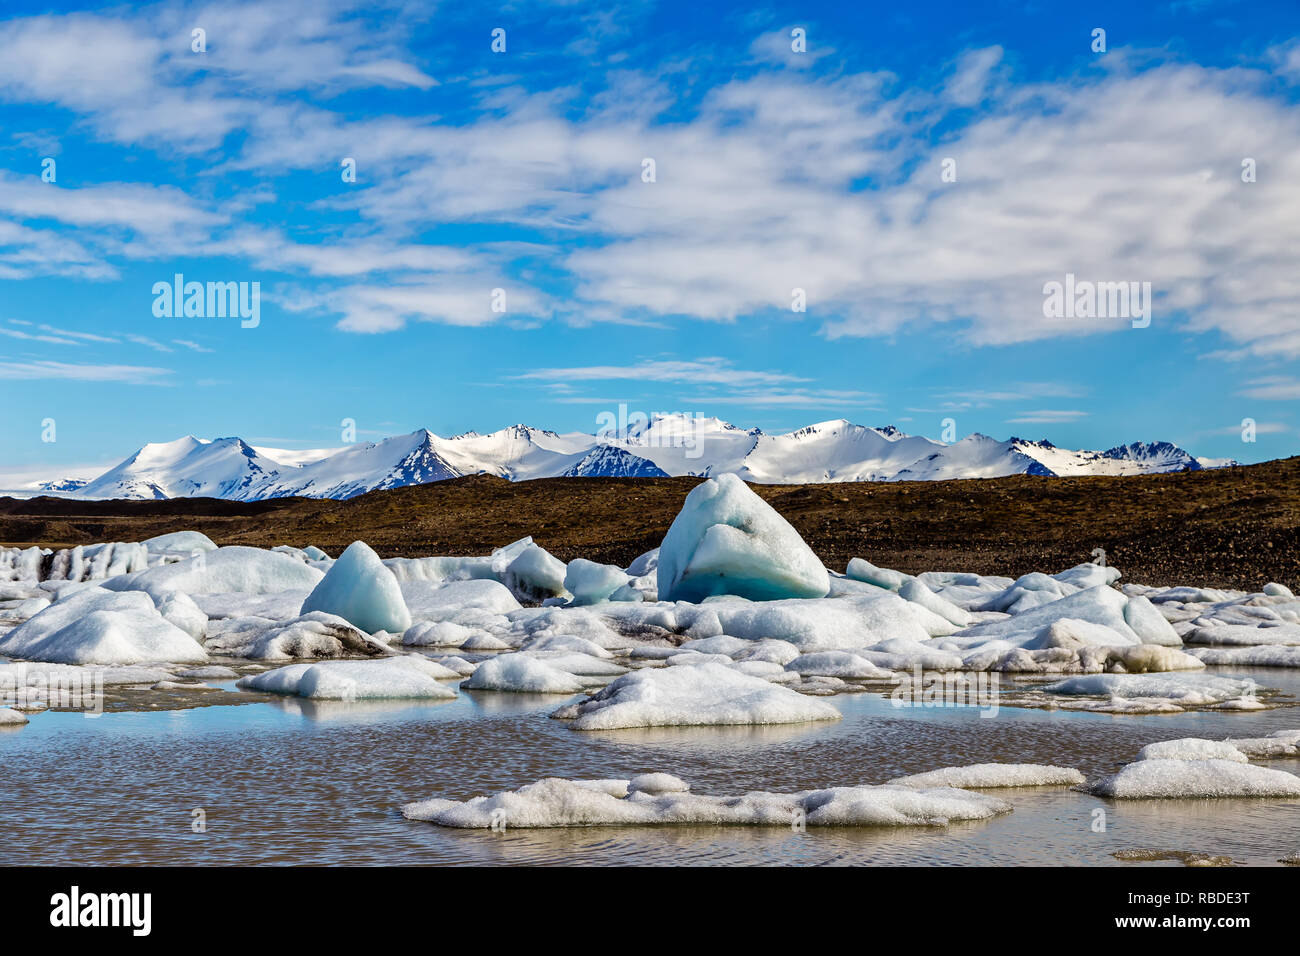 Fjallsarlon is a glacial lake at the southern end of the Iclandic glacier Vetnajökull. The many icebergs in the lake are prticularty attractive. Stock Photo